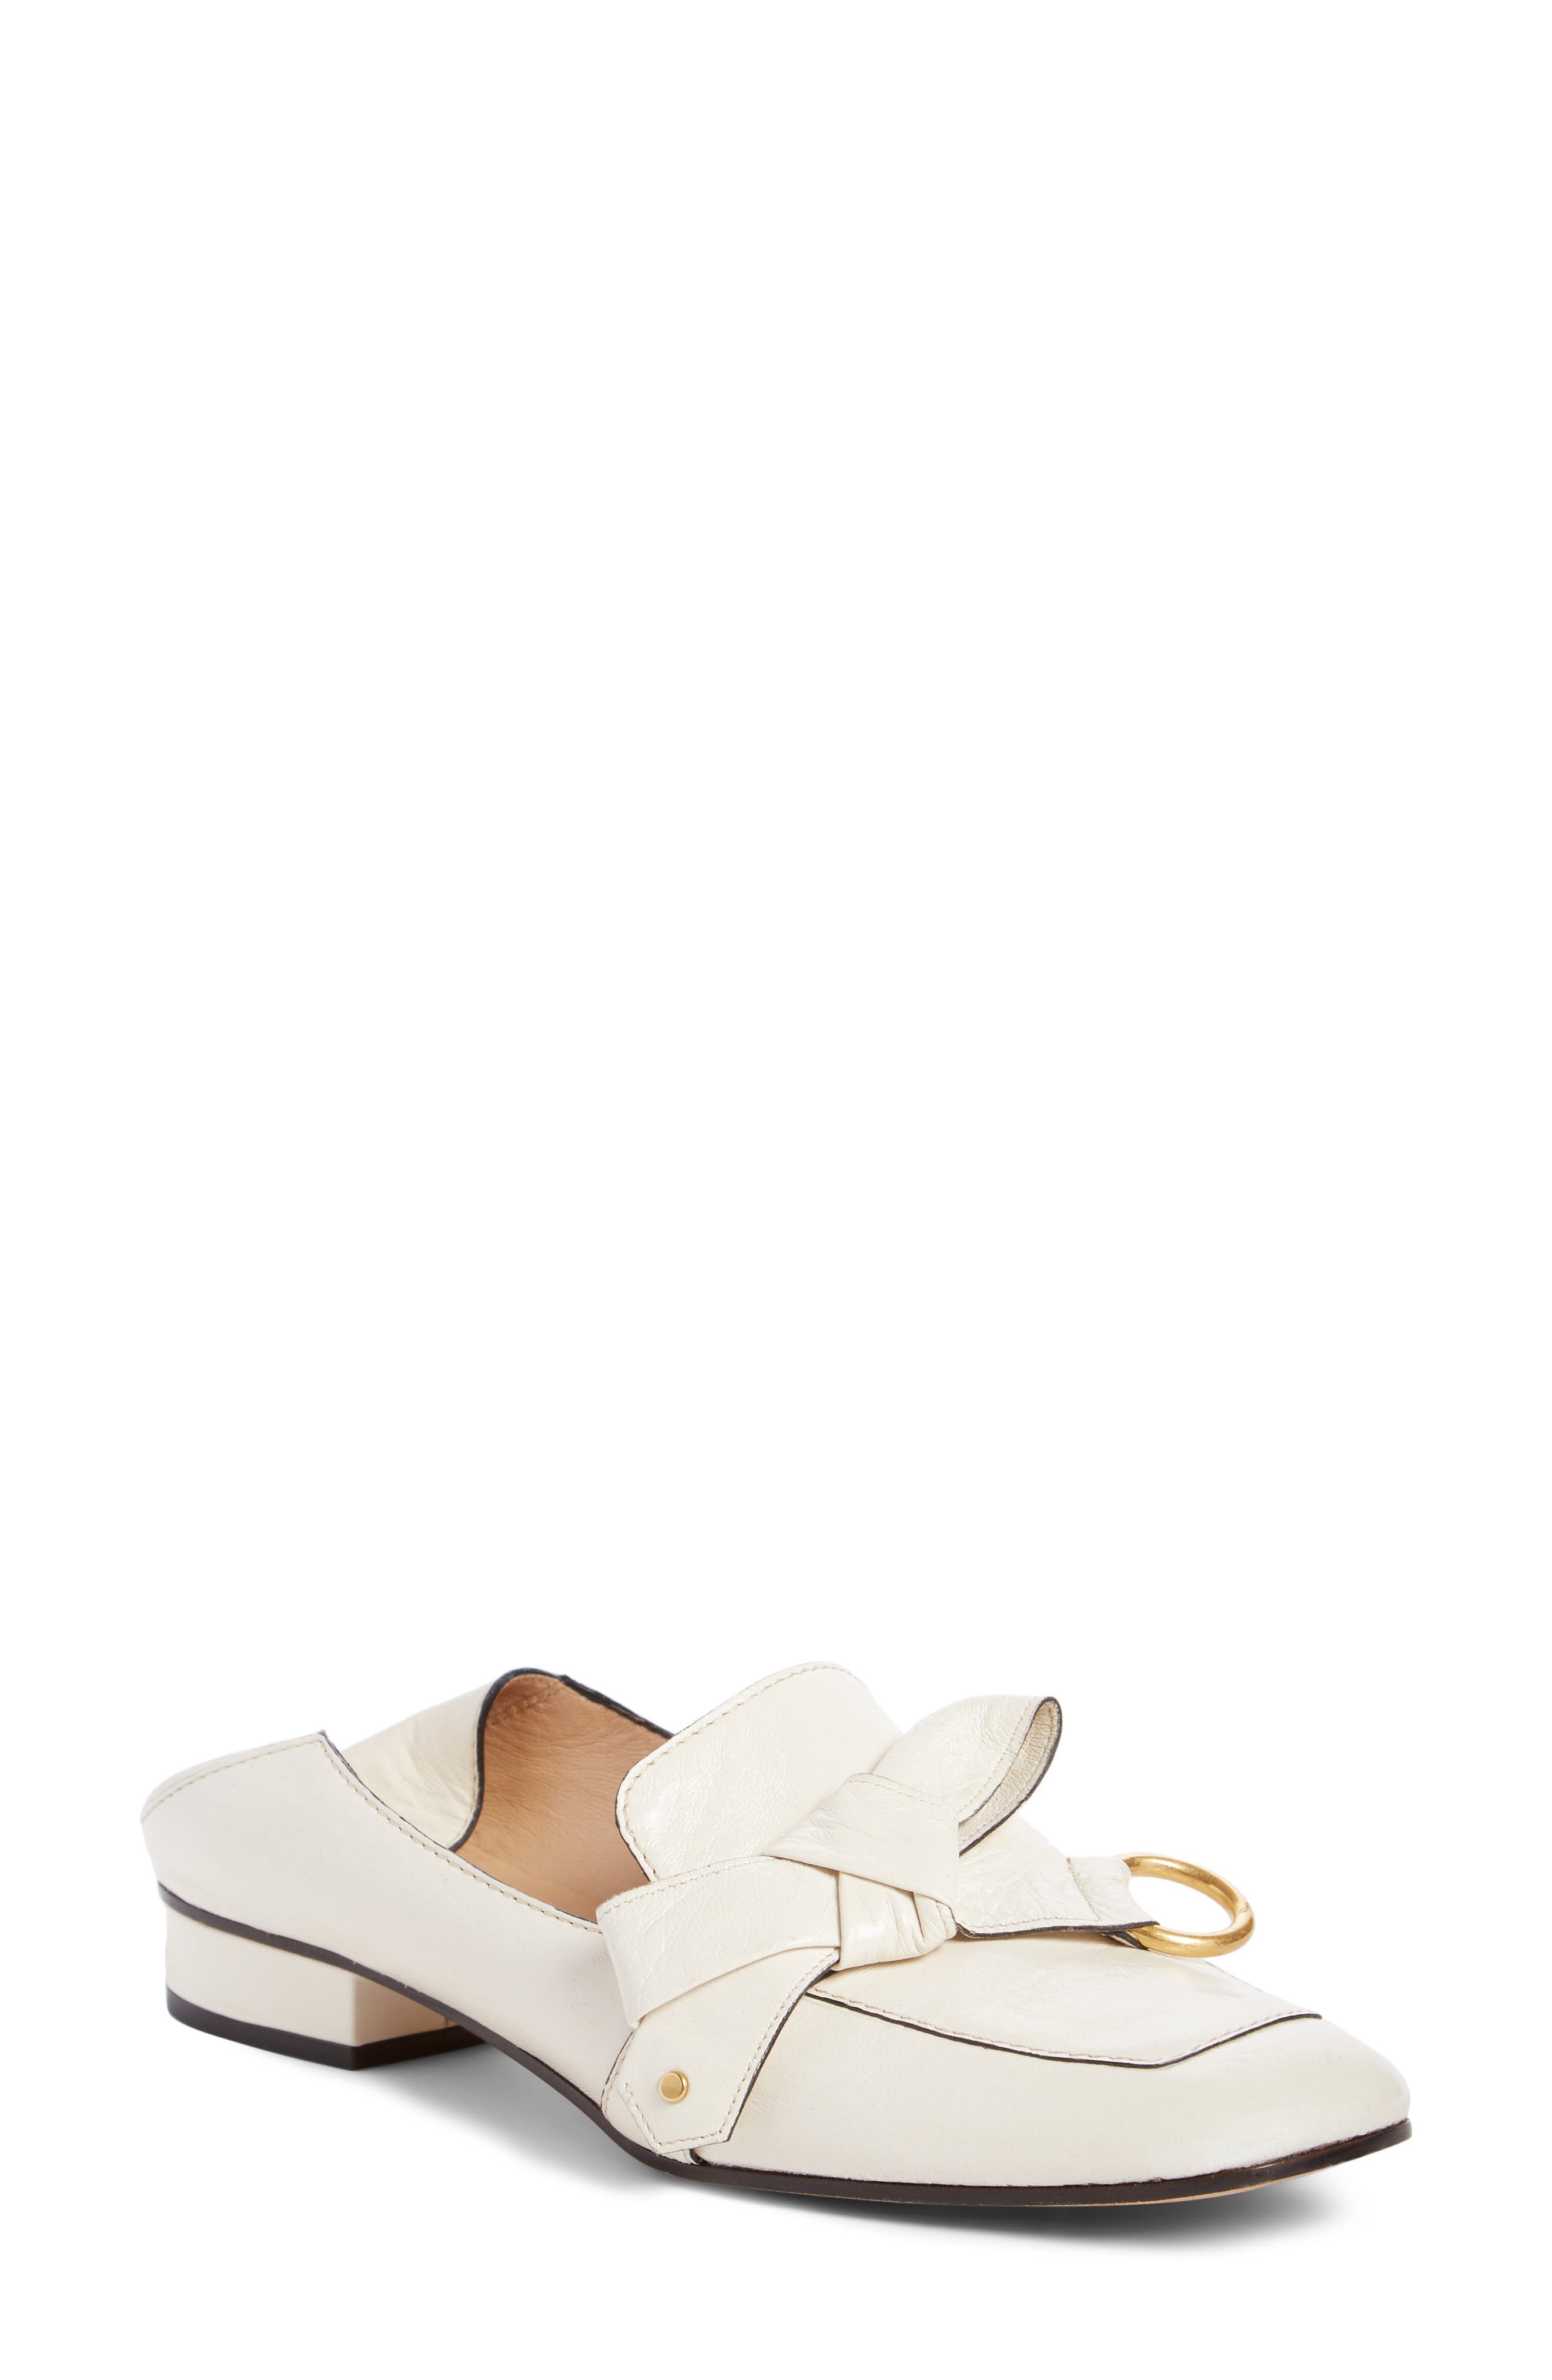 chloe quincy loafer